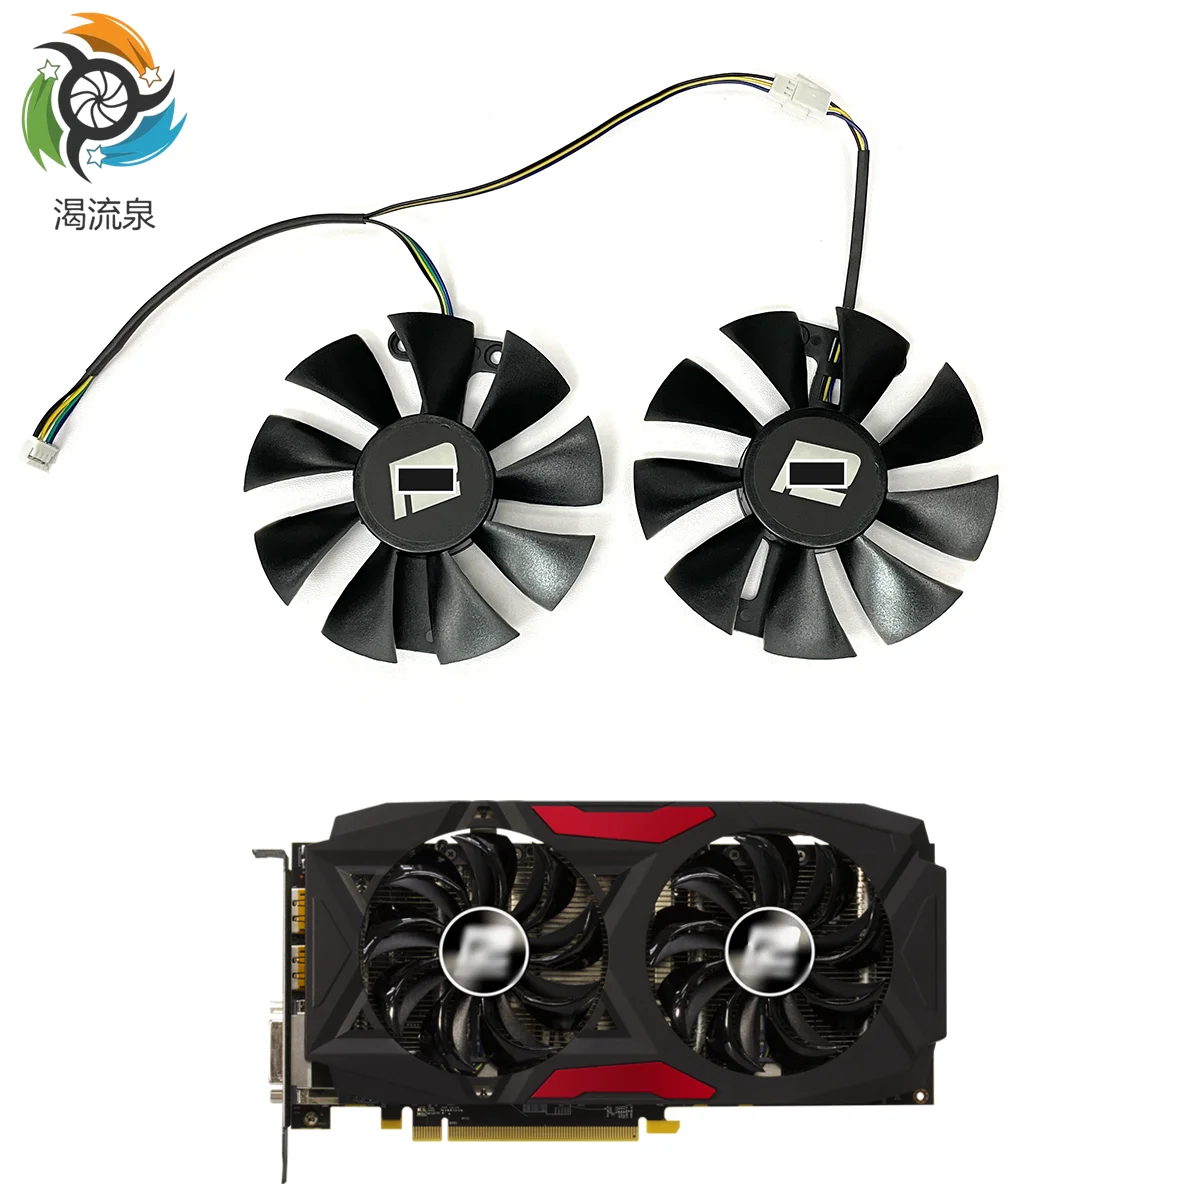 

New GA91S2U Cooling Fan Replacement For PowerColor Red Devil Radeon RX 470 480 580 Graphics Video Card Cooler Fan